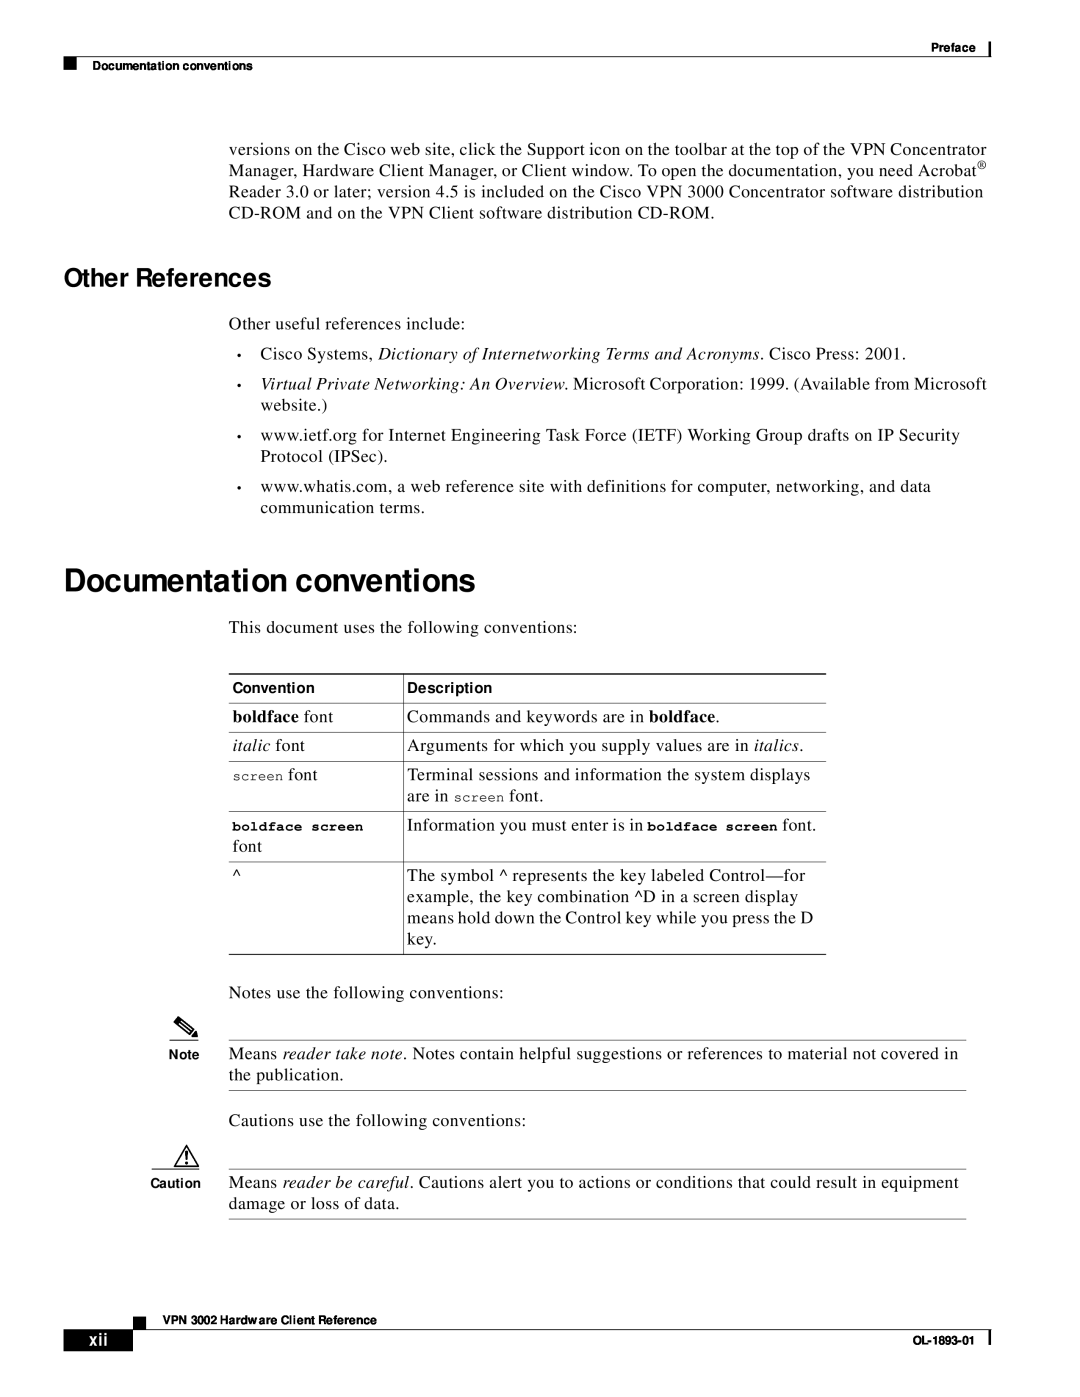 Cisco Systems VPN 3002 Documentation conventions, Other References, Convention, boldface font, italic font, Description 